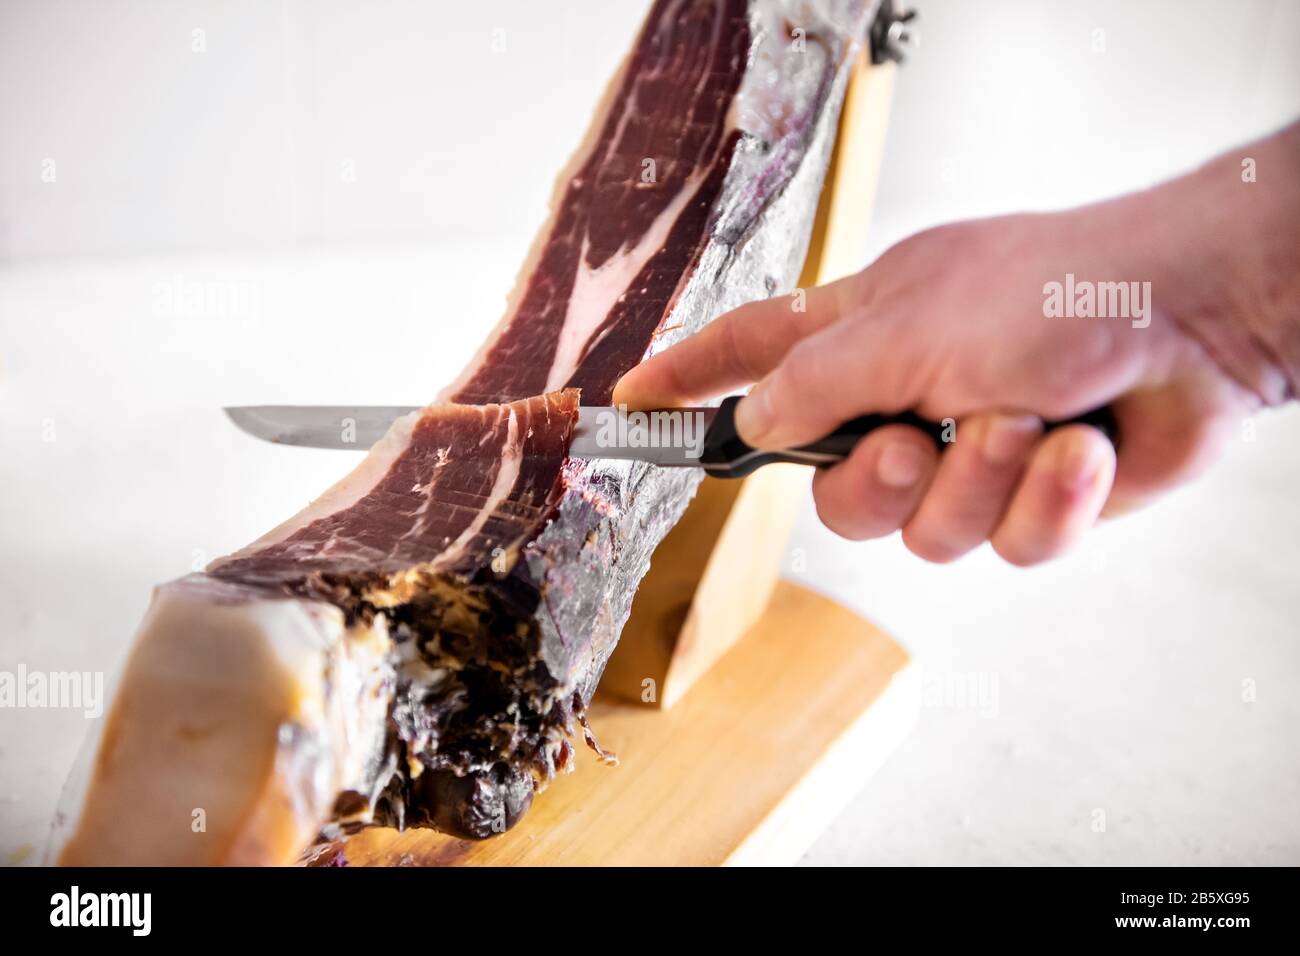 Close-up on male hand slicing Jamon Iberica or Pata Negra Iberian ham from Spain. Cropped view against white background Stock Photo